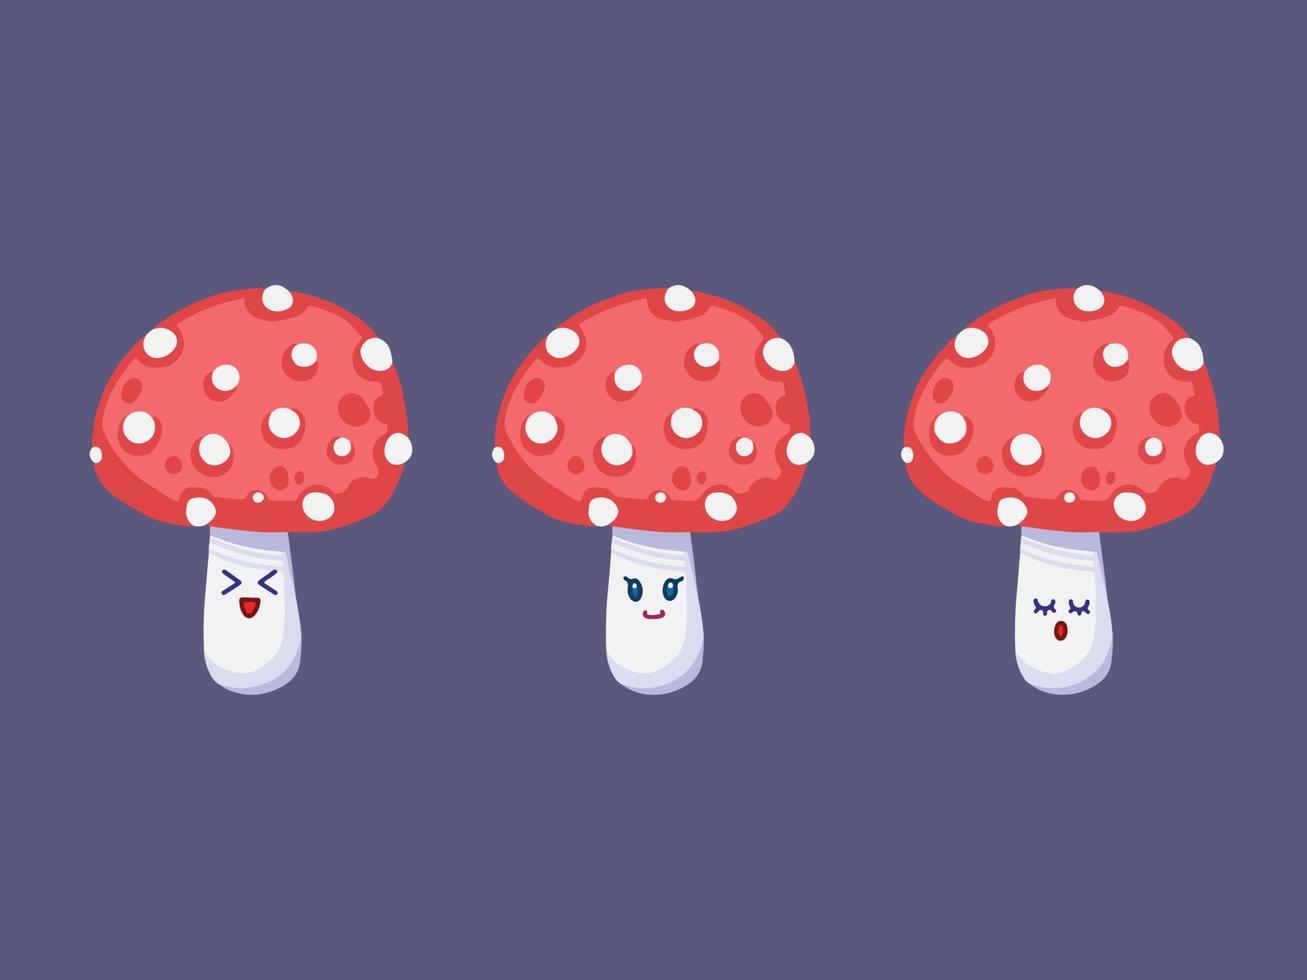 Sets of three red wild pretty forest mushroom vector avatar character mascot illustration isolated on plain dark gray background. Kawaii cute character drawing with cartoon flat art style.